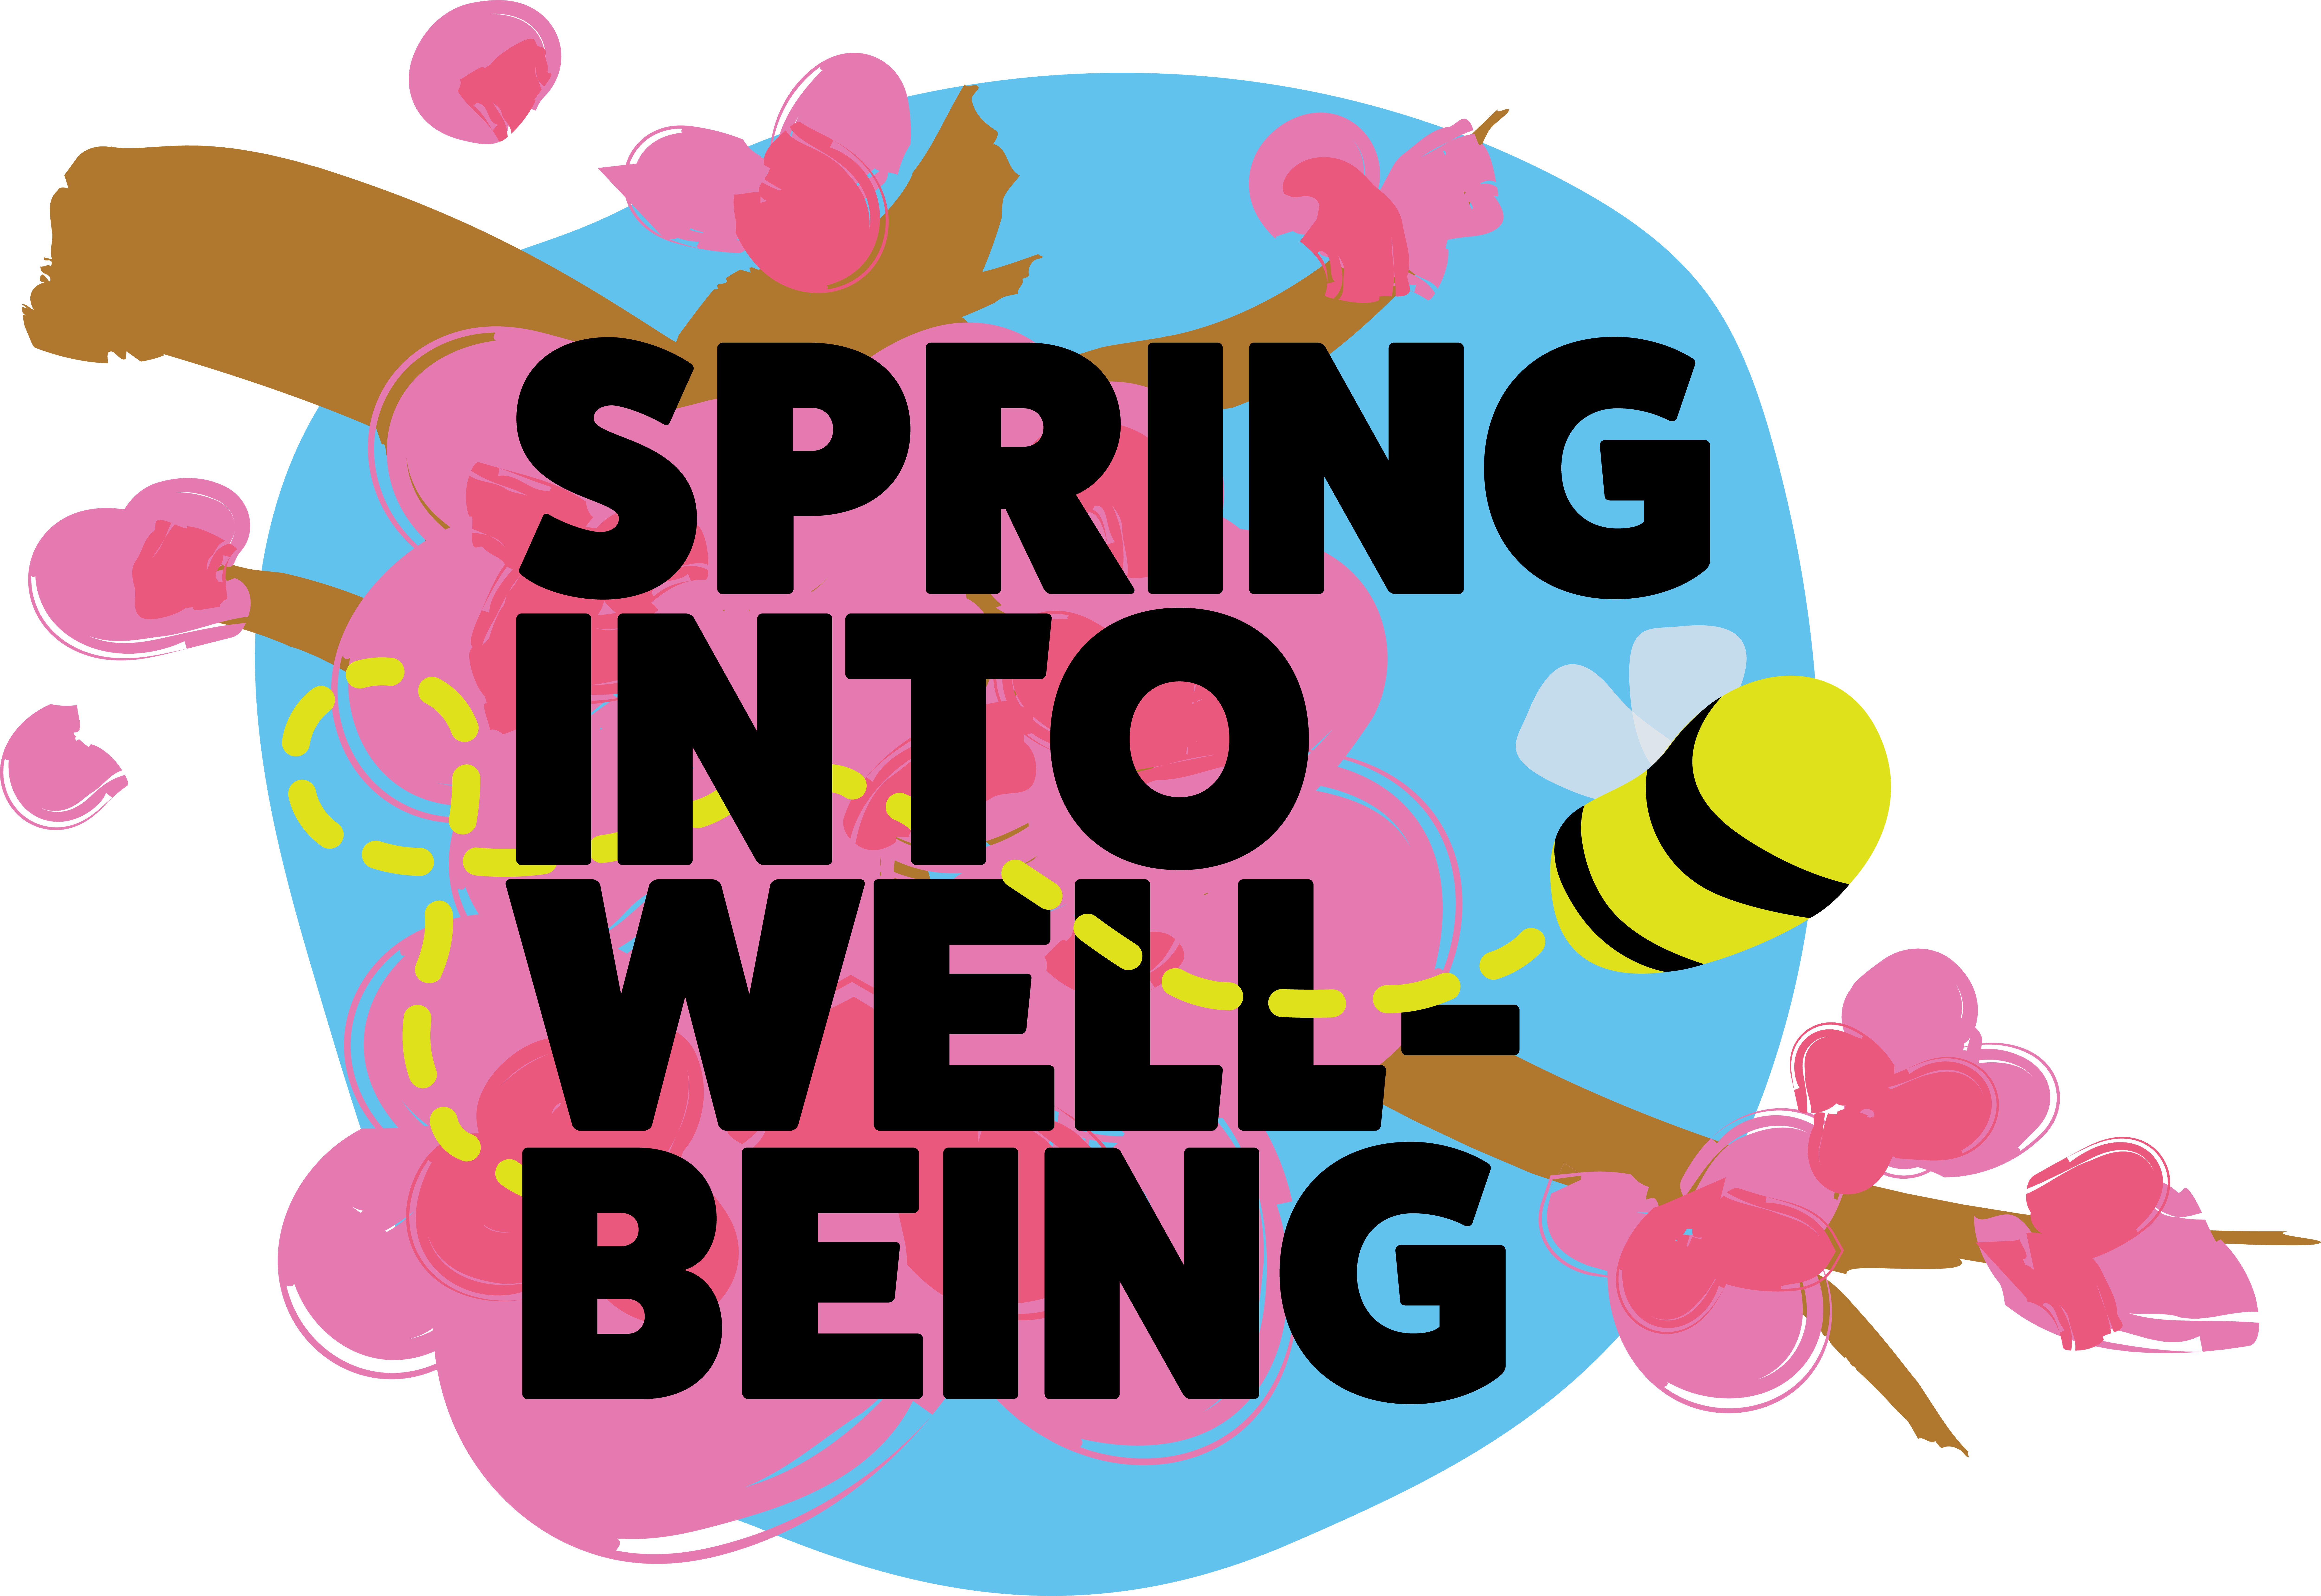 Spring into Well-Being